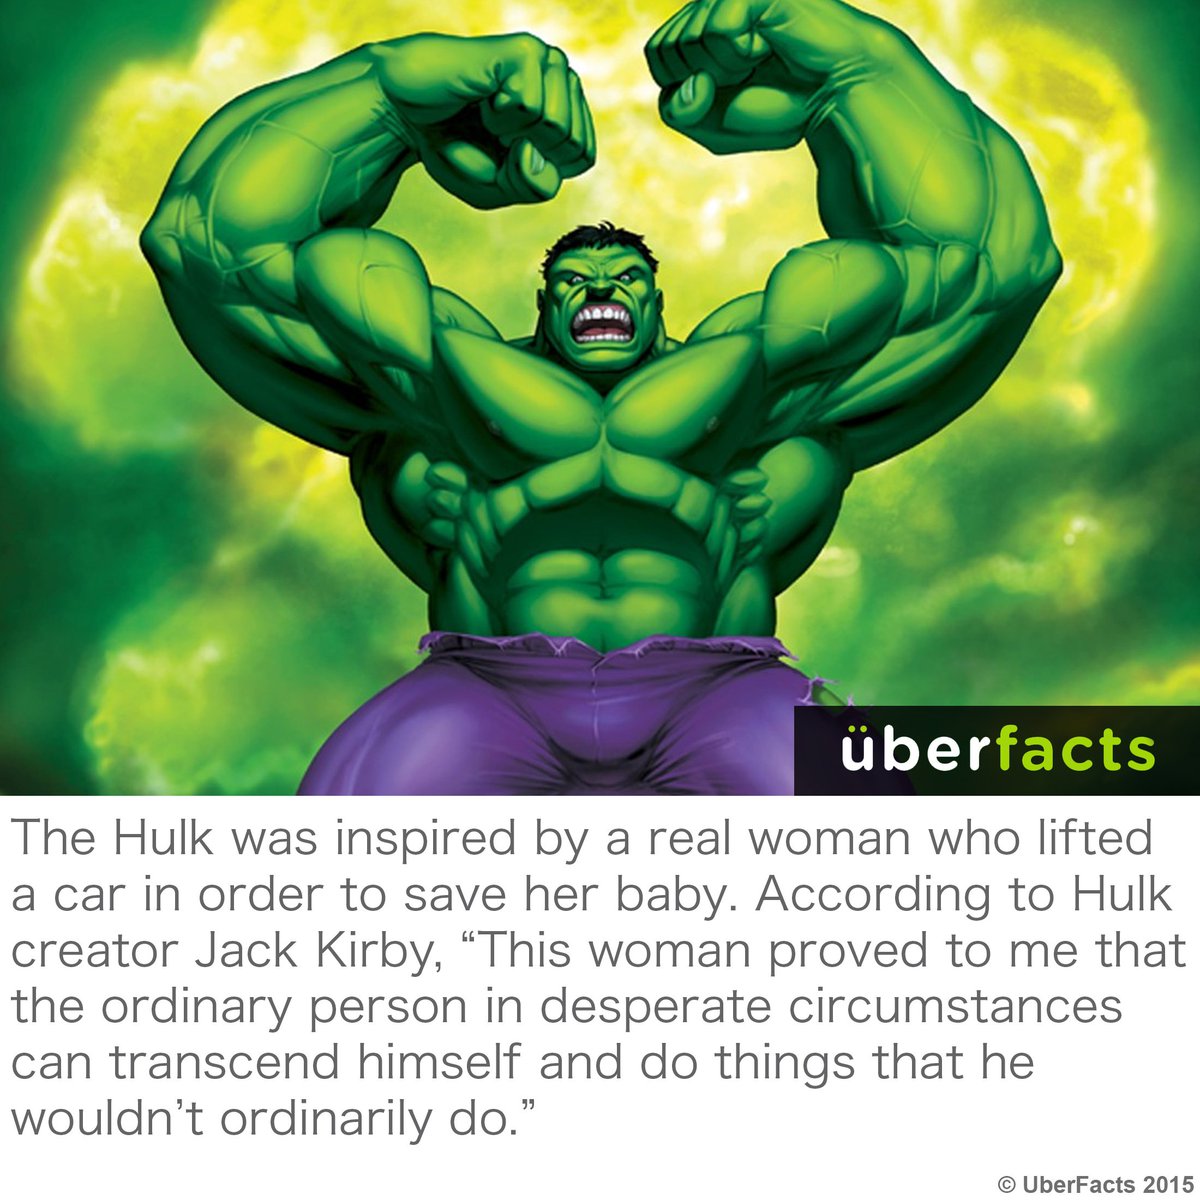 Wow. http://io9.com/the-incredible-hulk-was-inspired-by-a-woman-saving-her-...